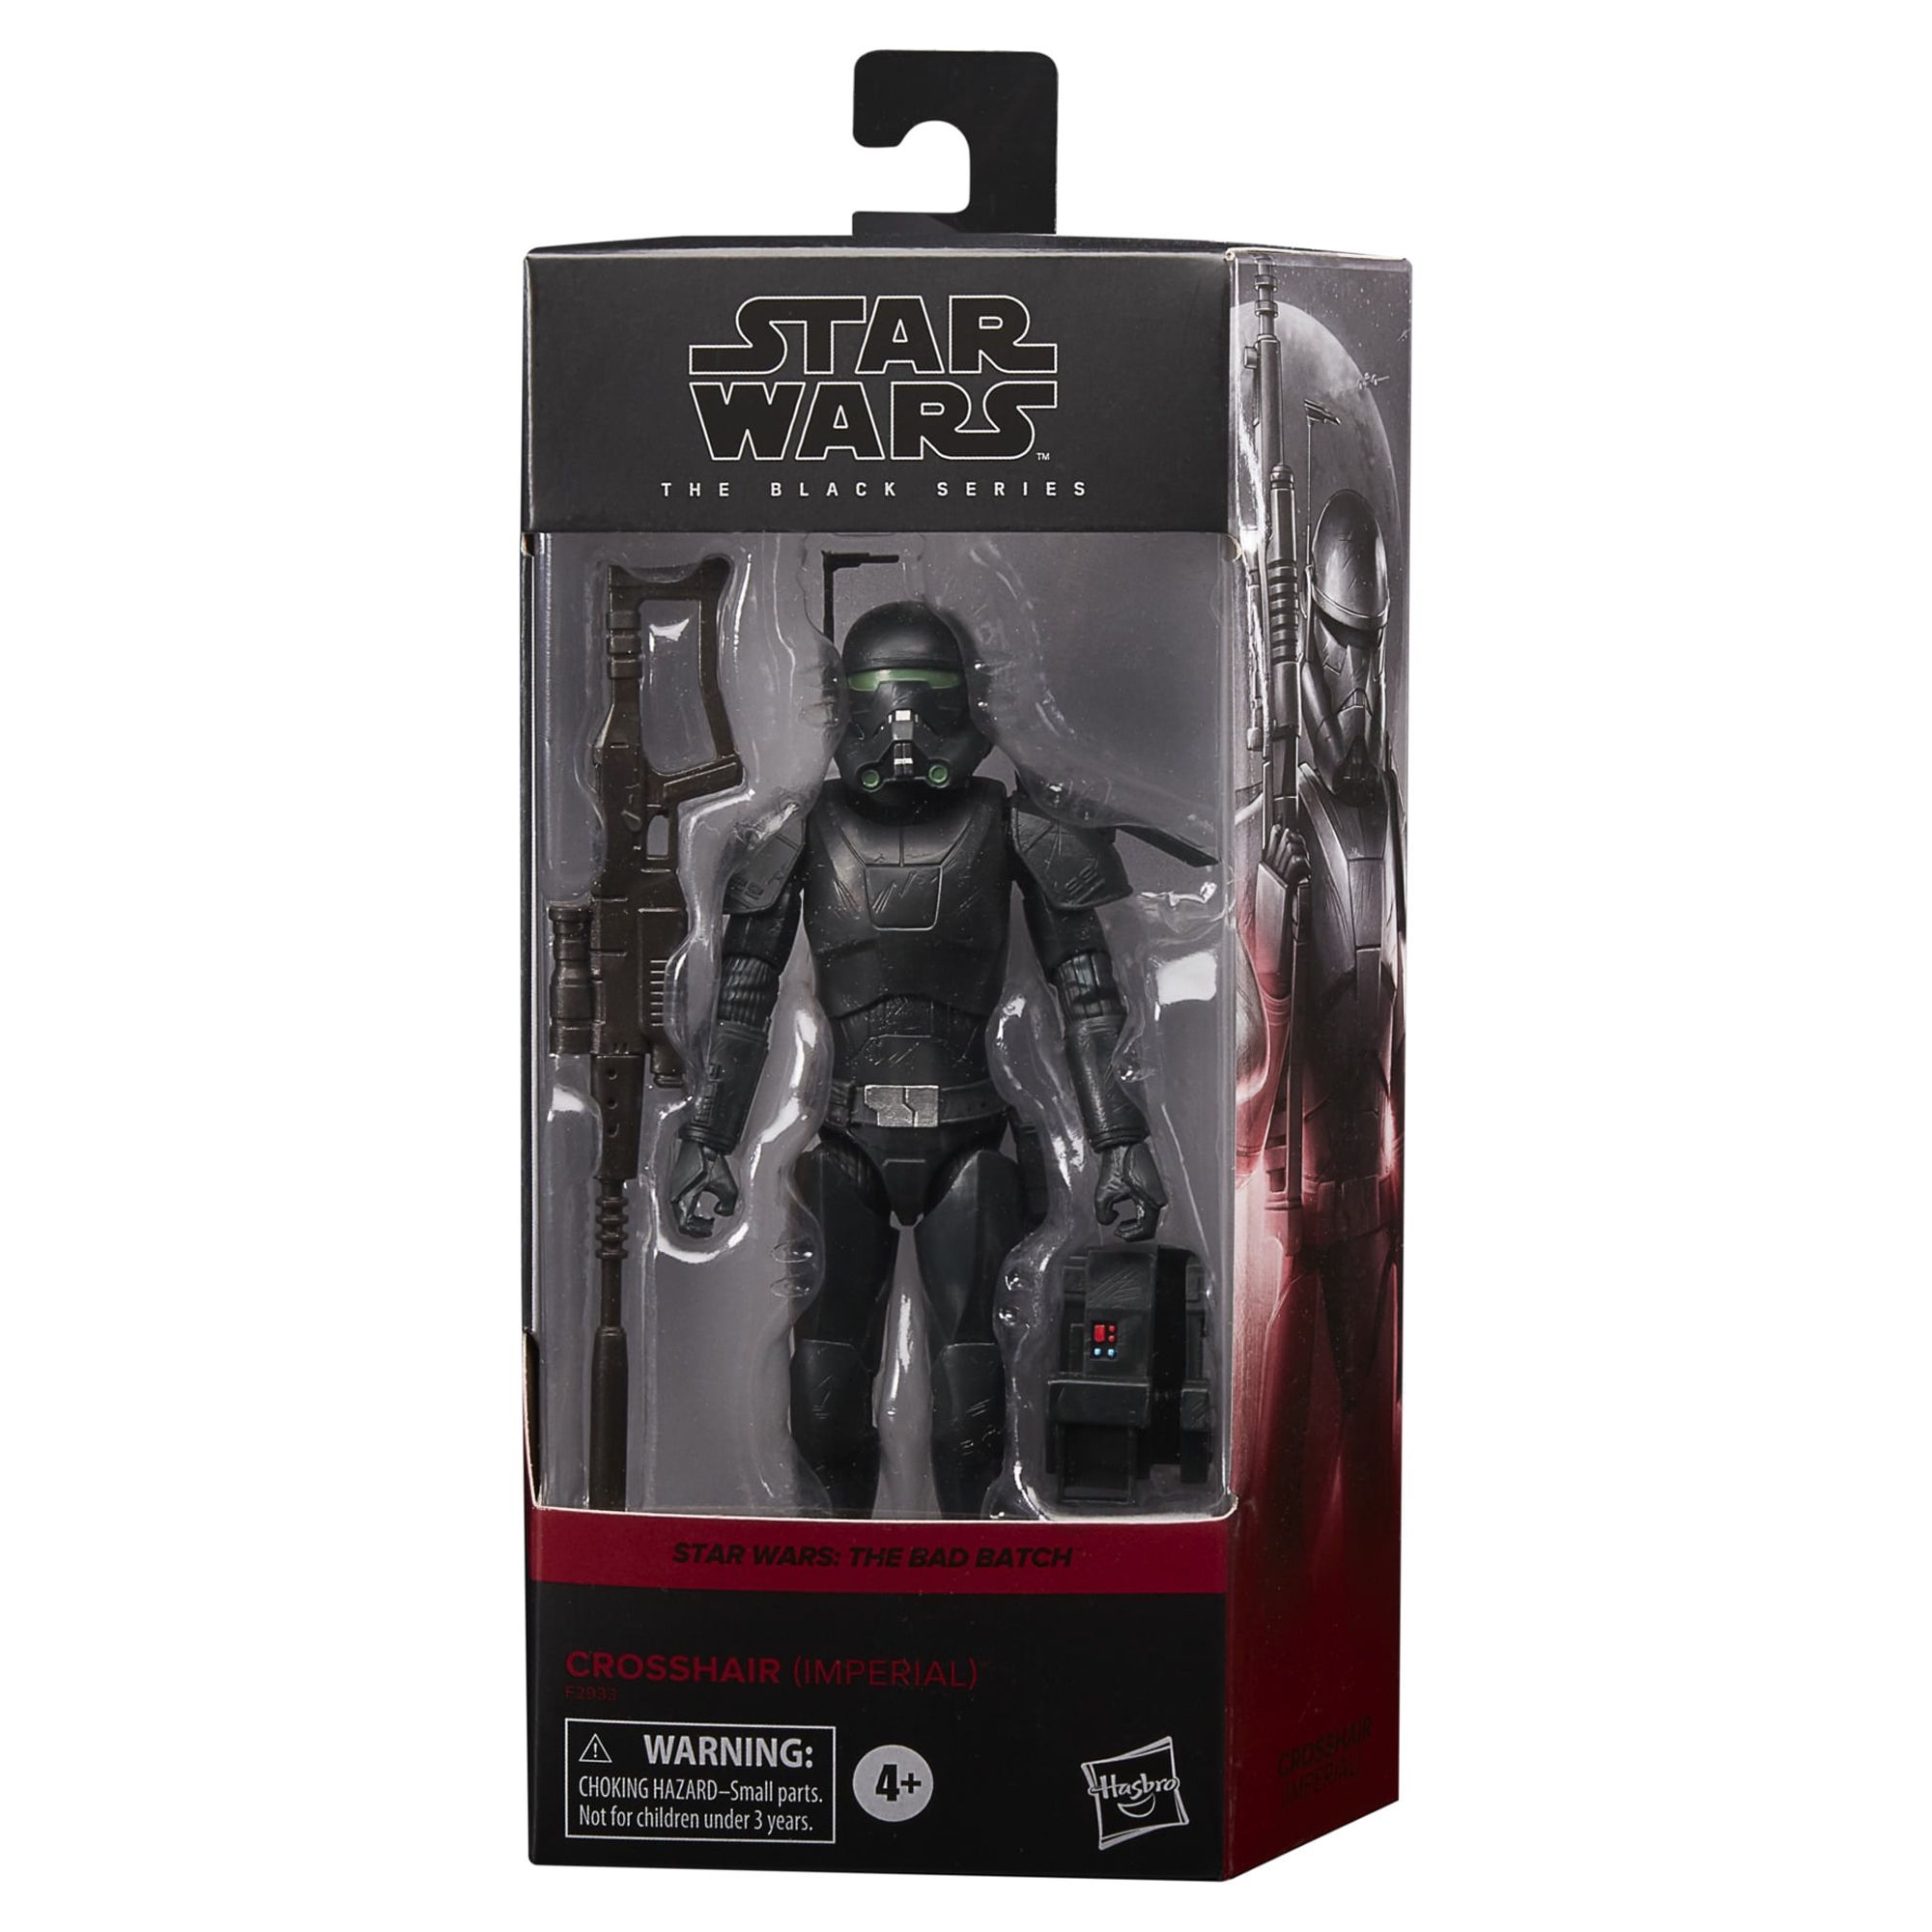 Star Wars: The Black Series Crosshair (Imperial) Kids Toy Action Figure for Boys and Girls Ages 4 5 6 7 8 and Up - image 2 of 8